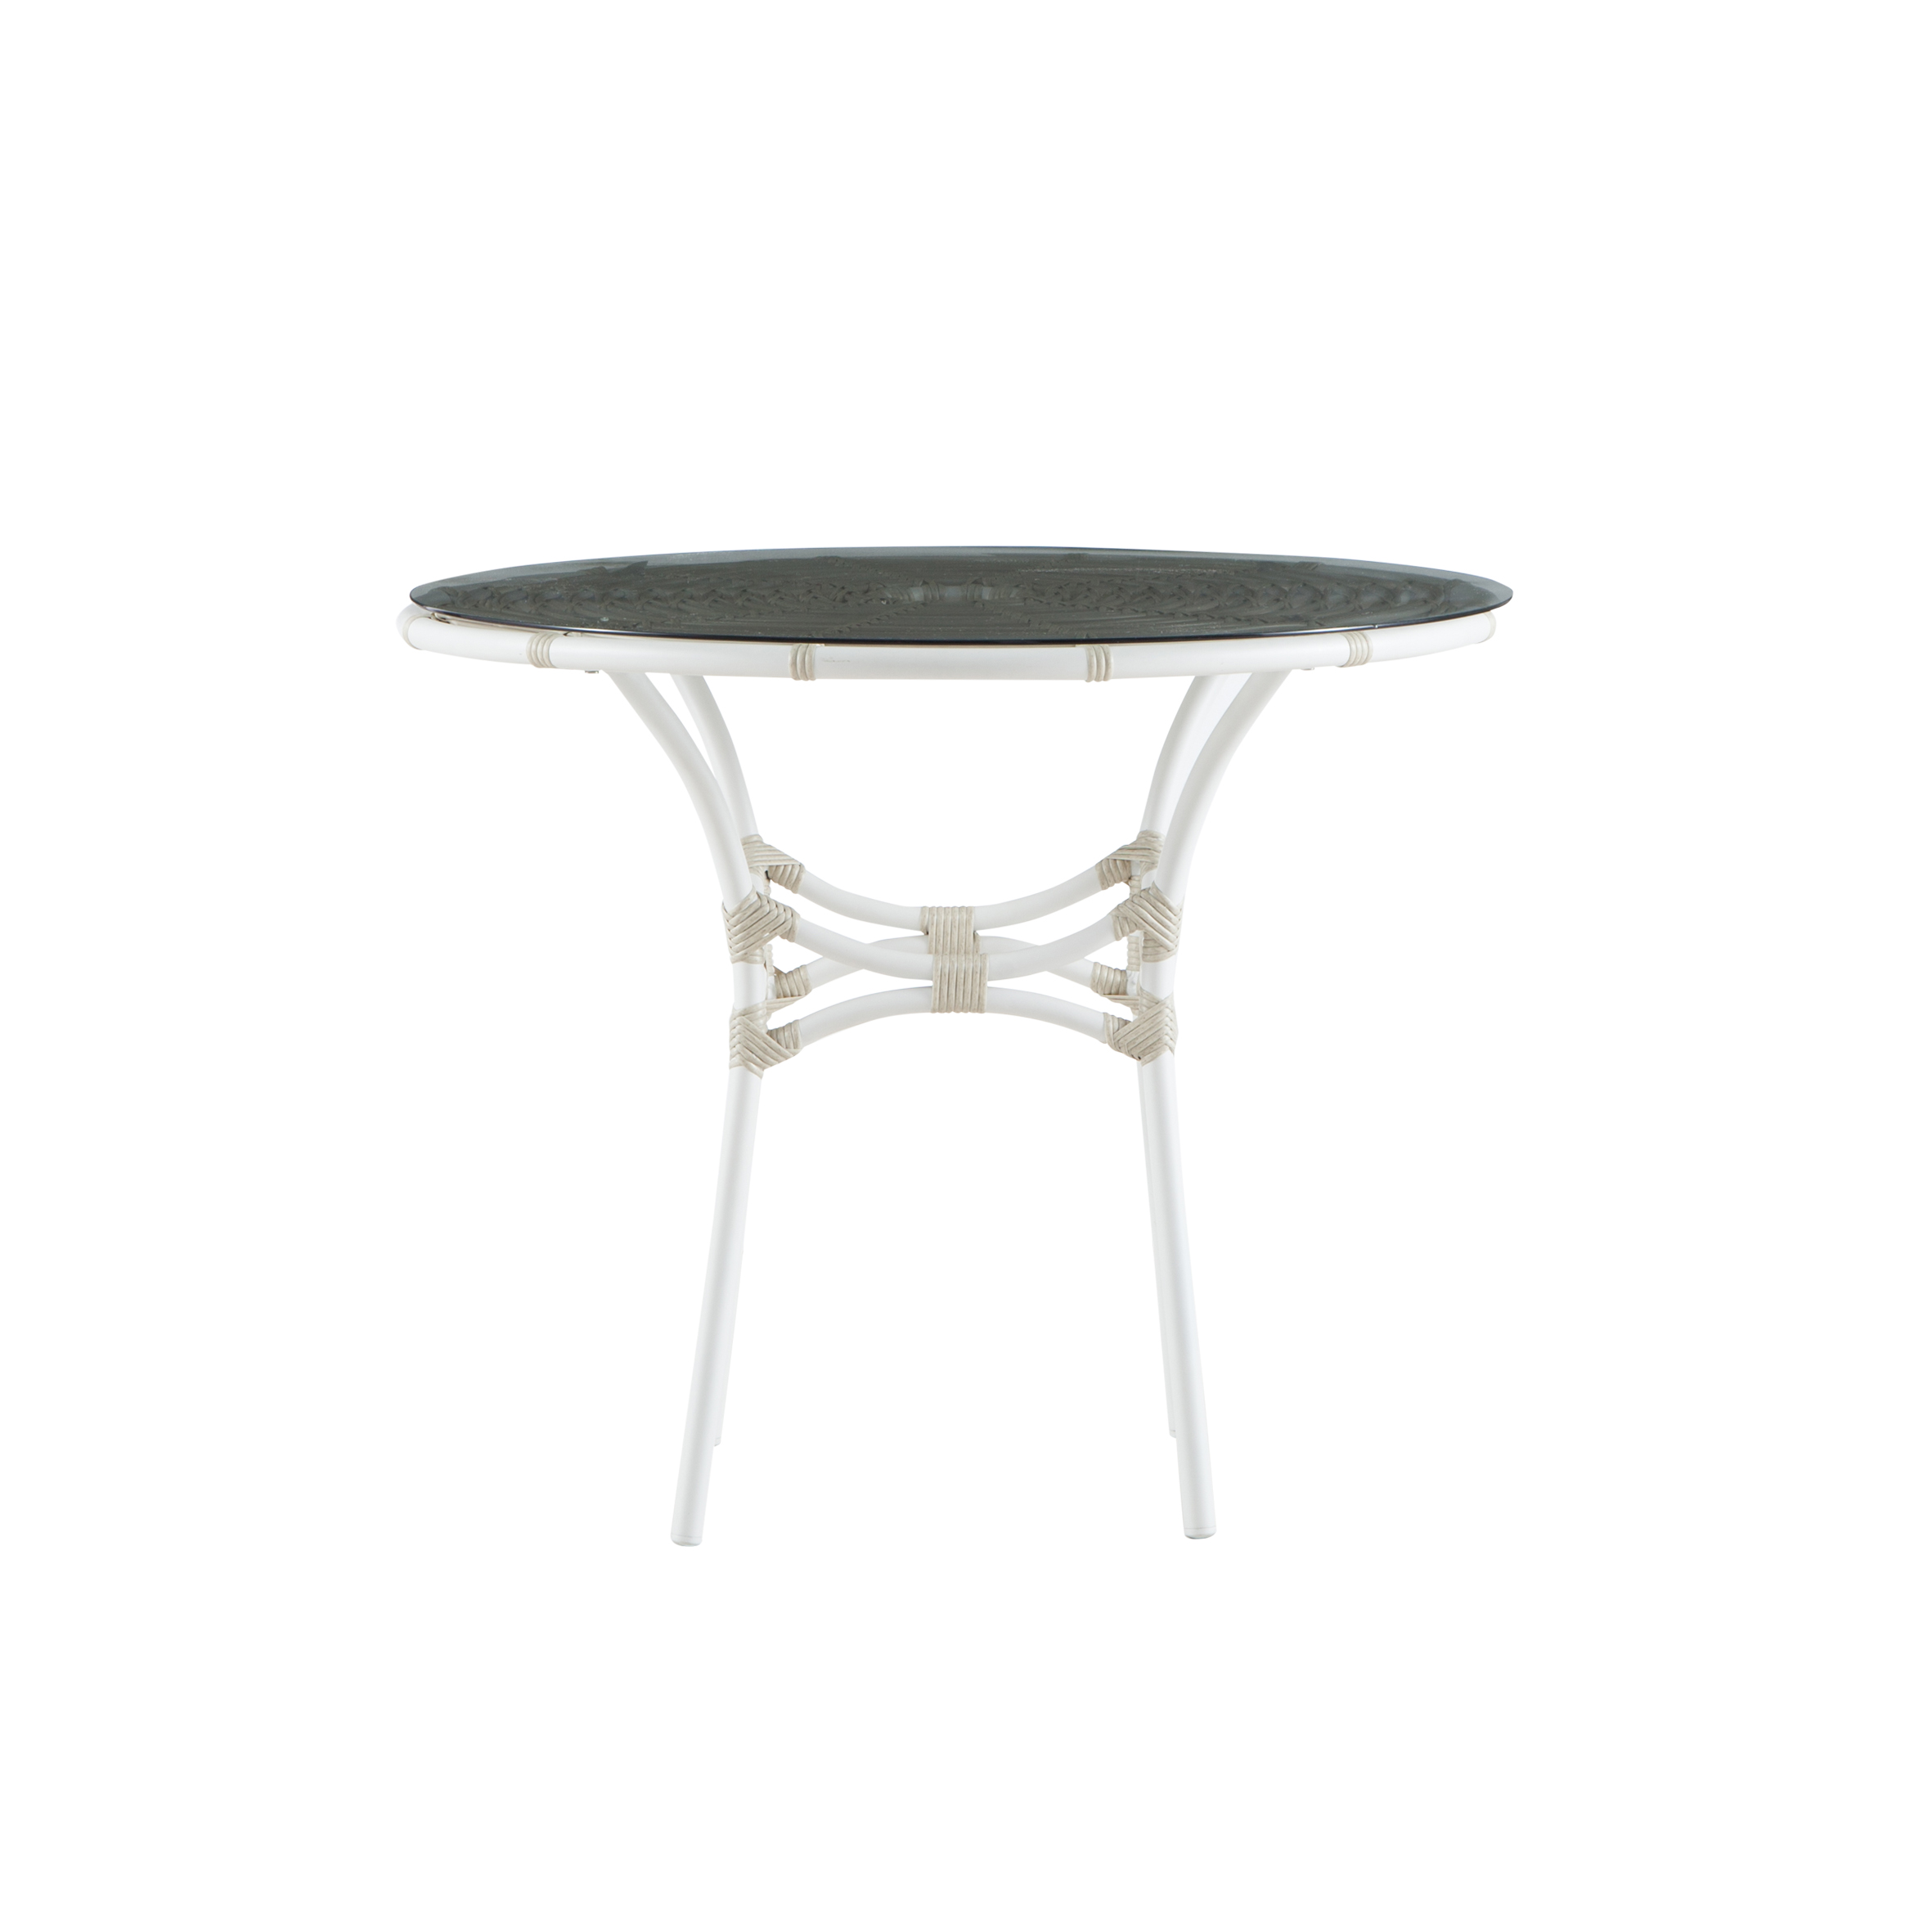 Poetry rattan dining table S1